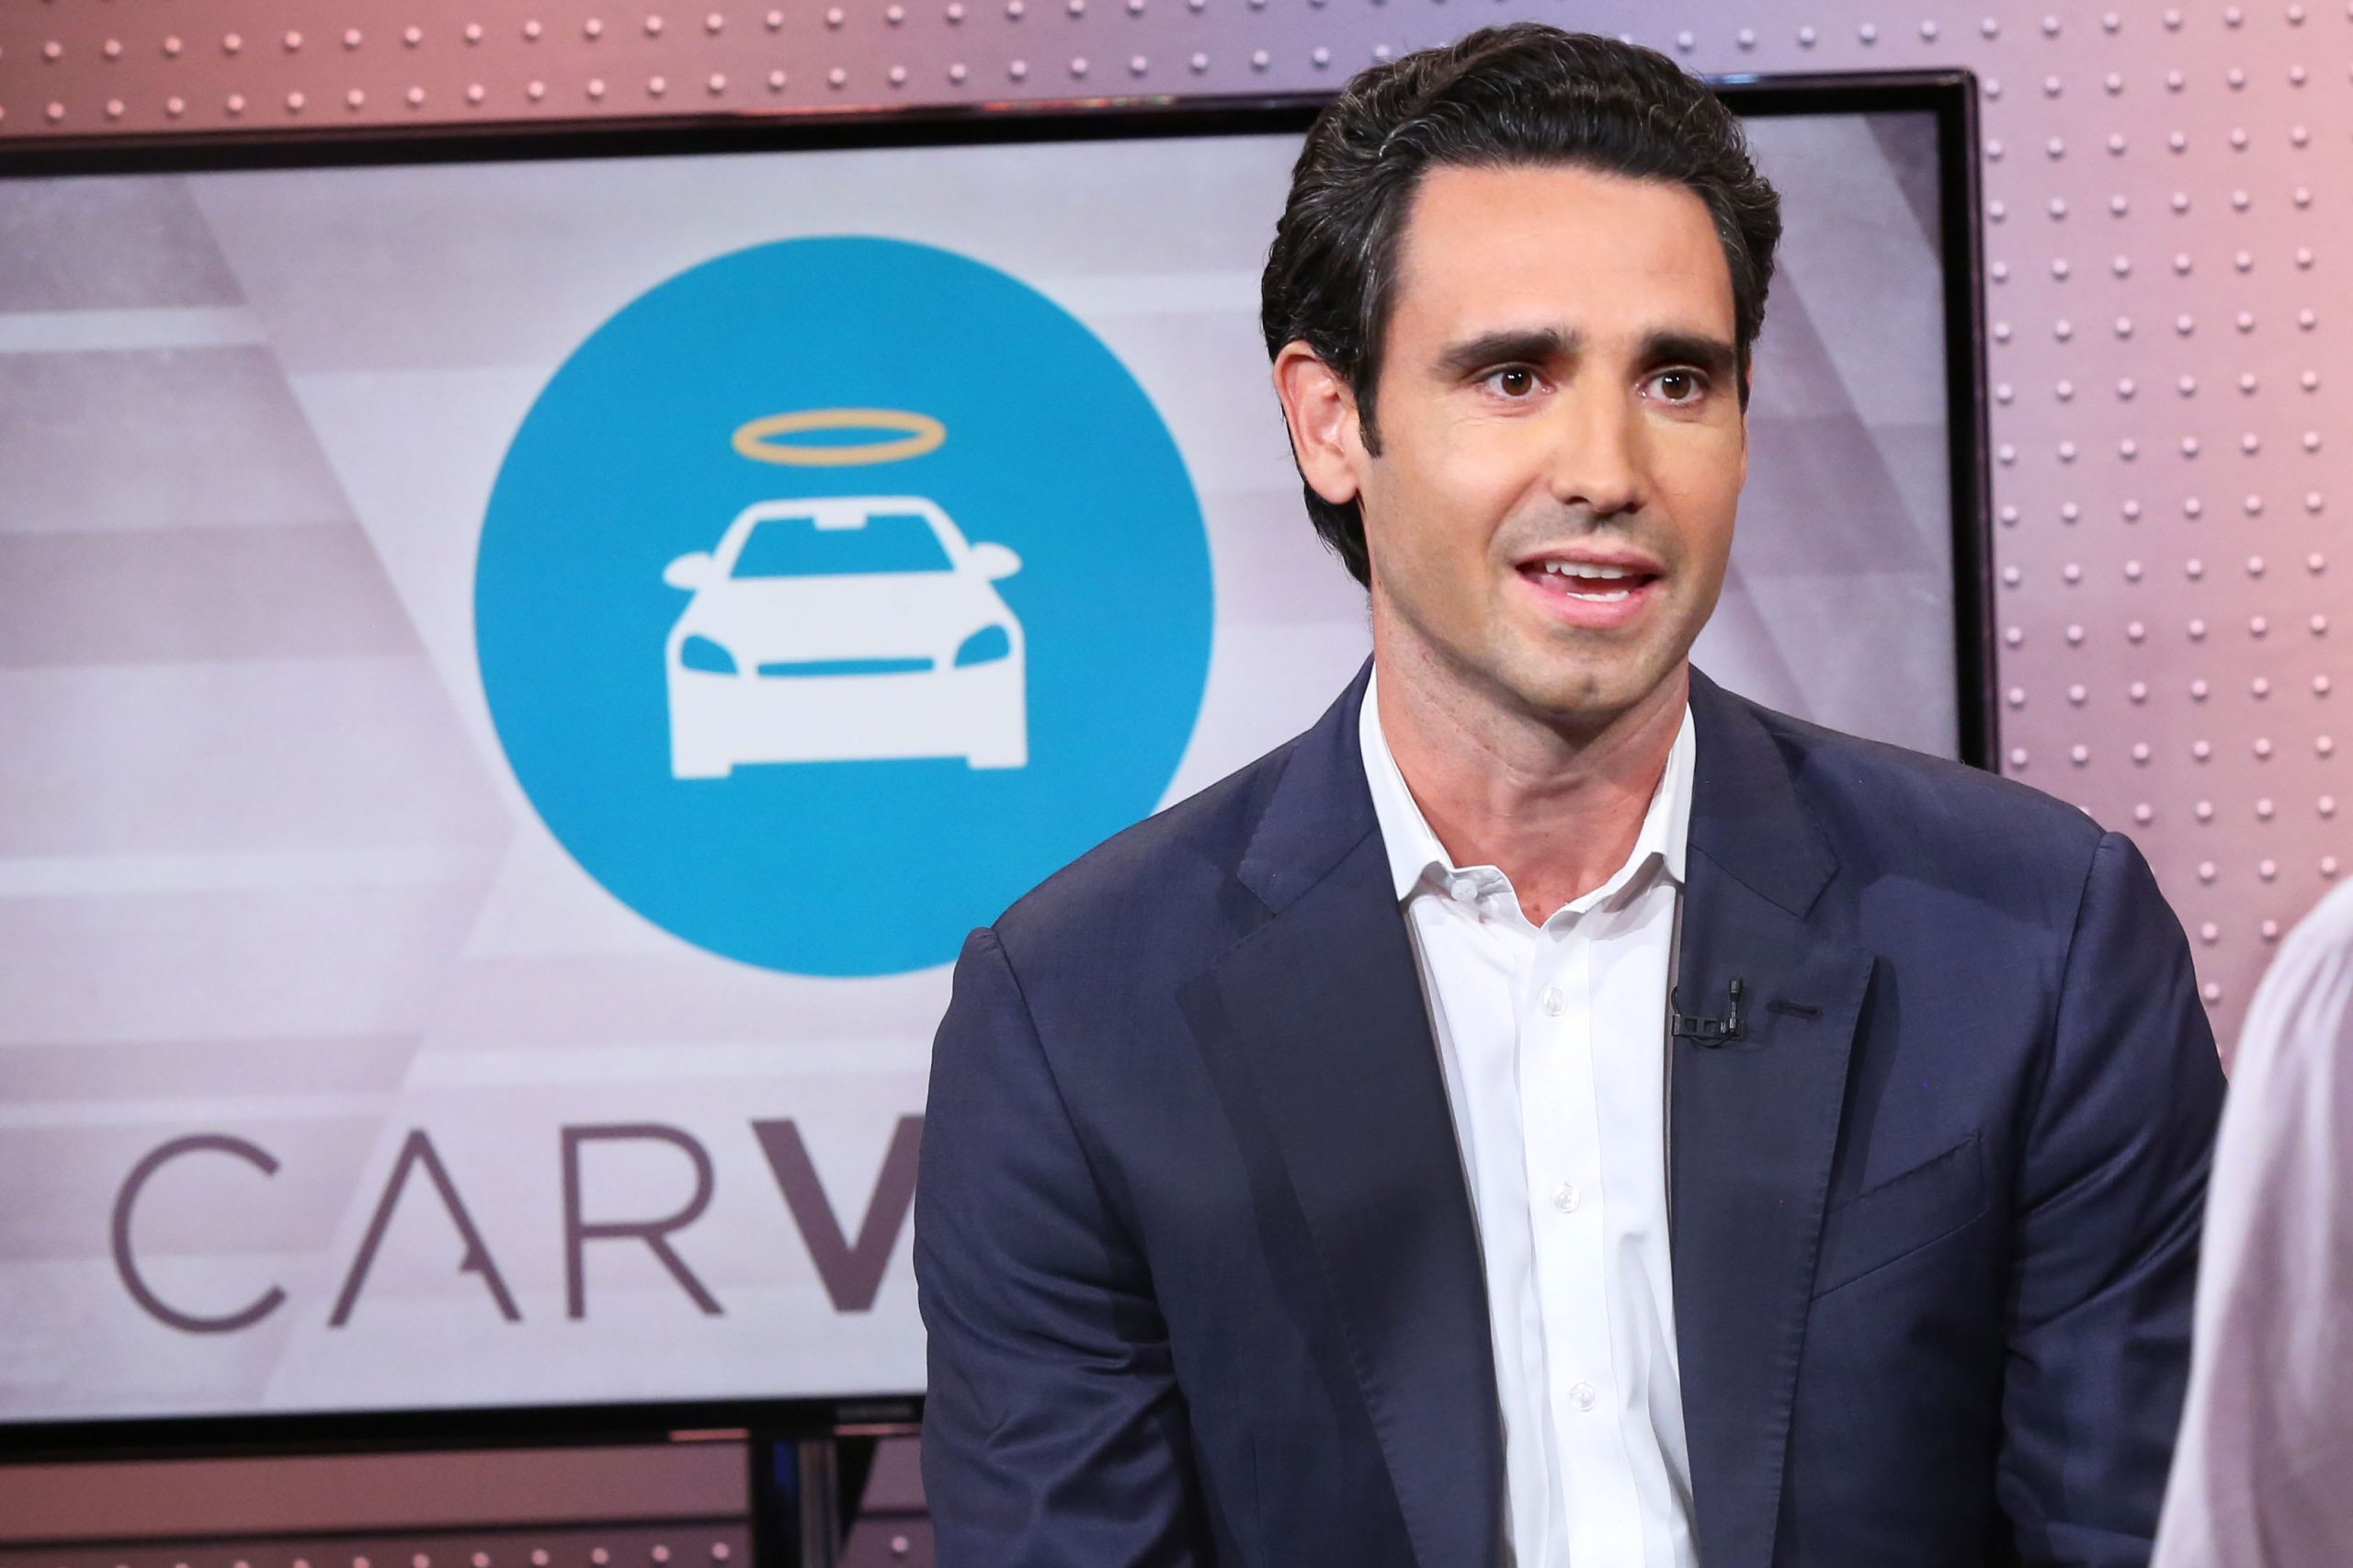 Carvana shares are up 24% after the company's first quarter sales